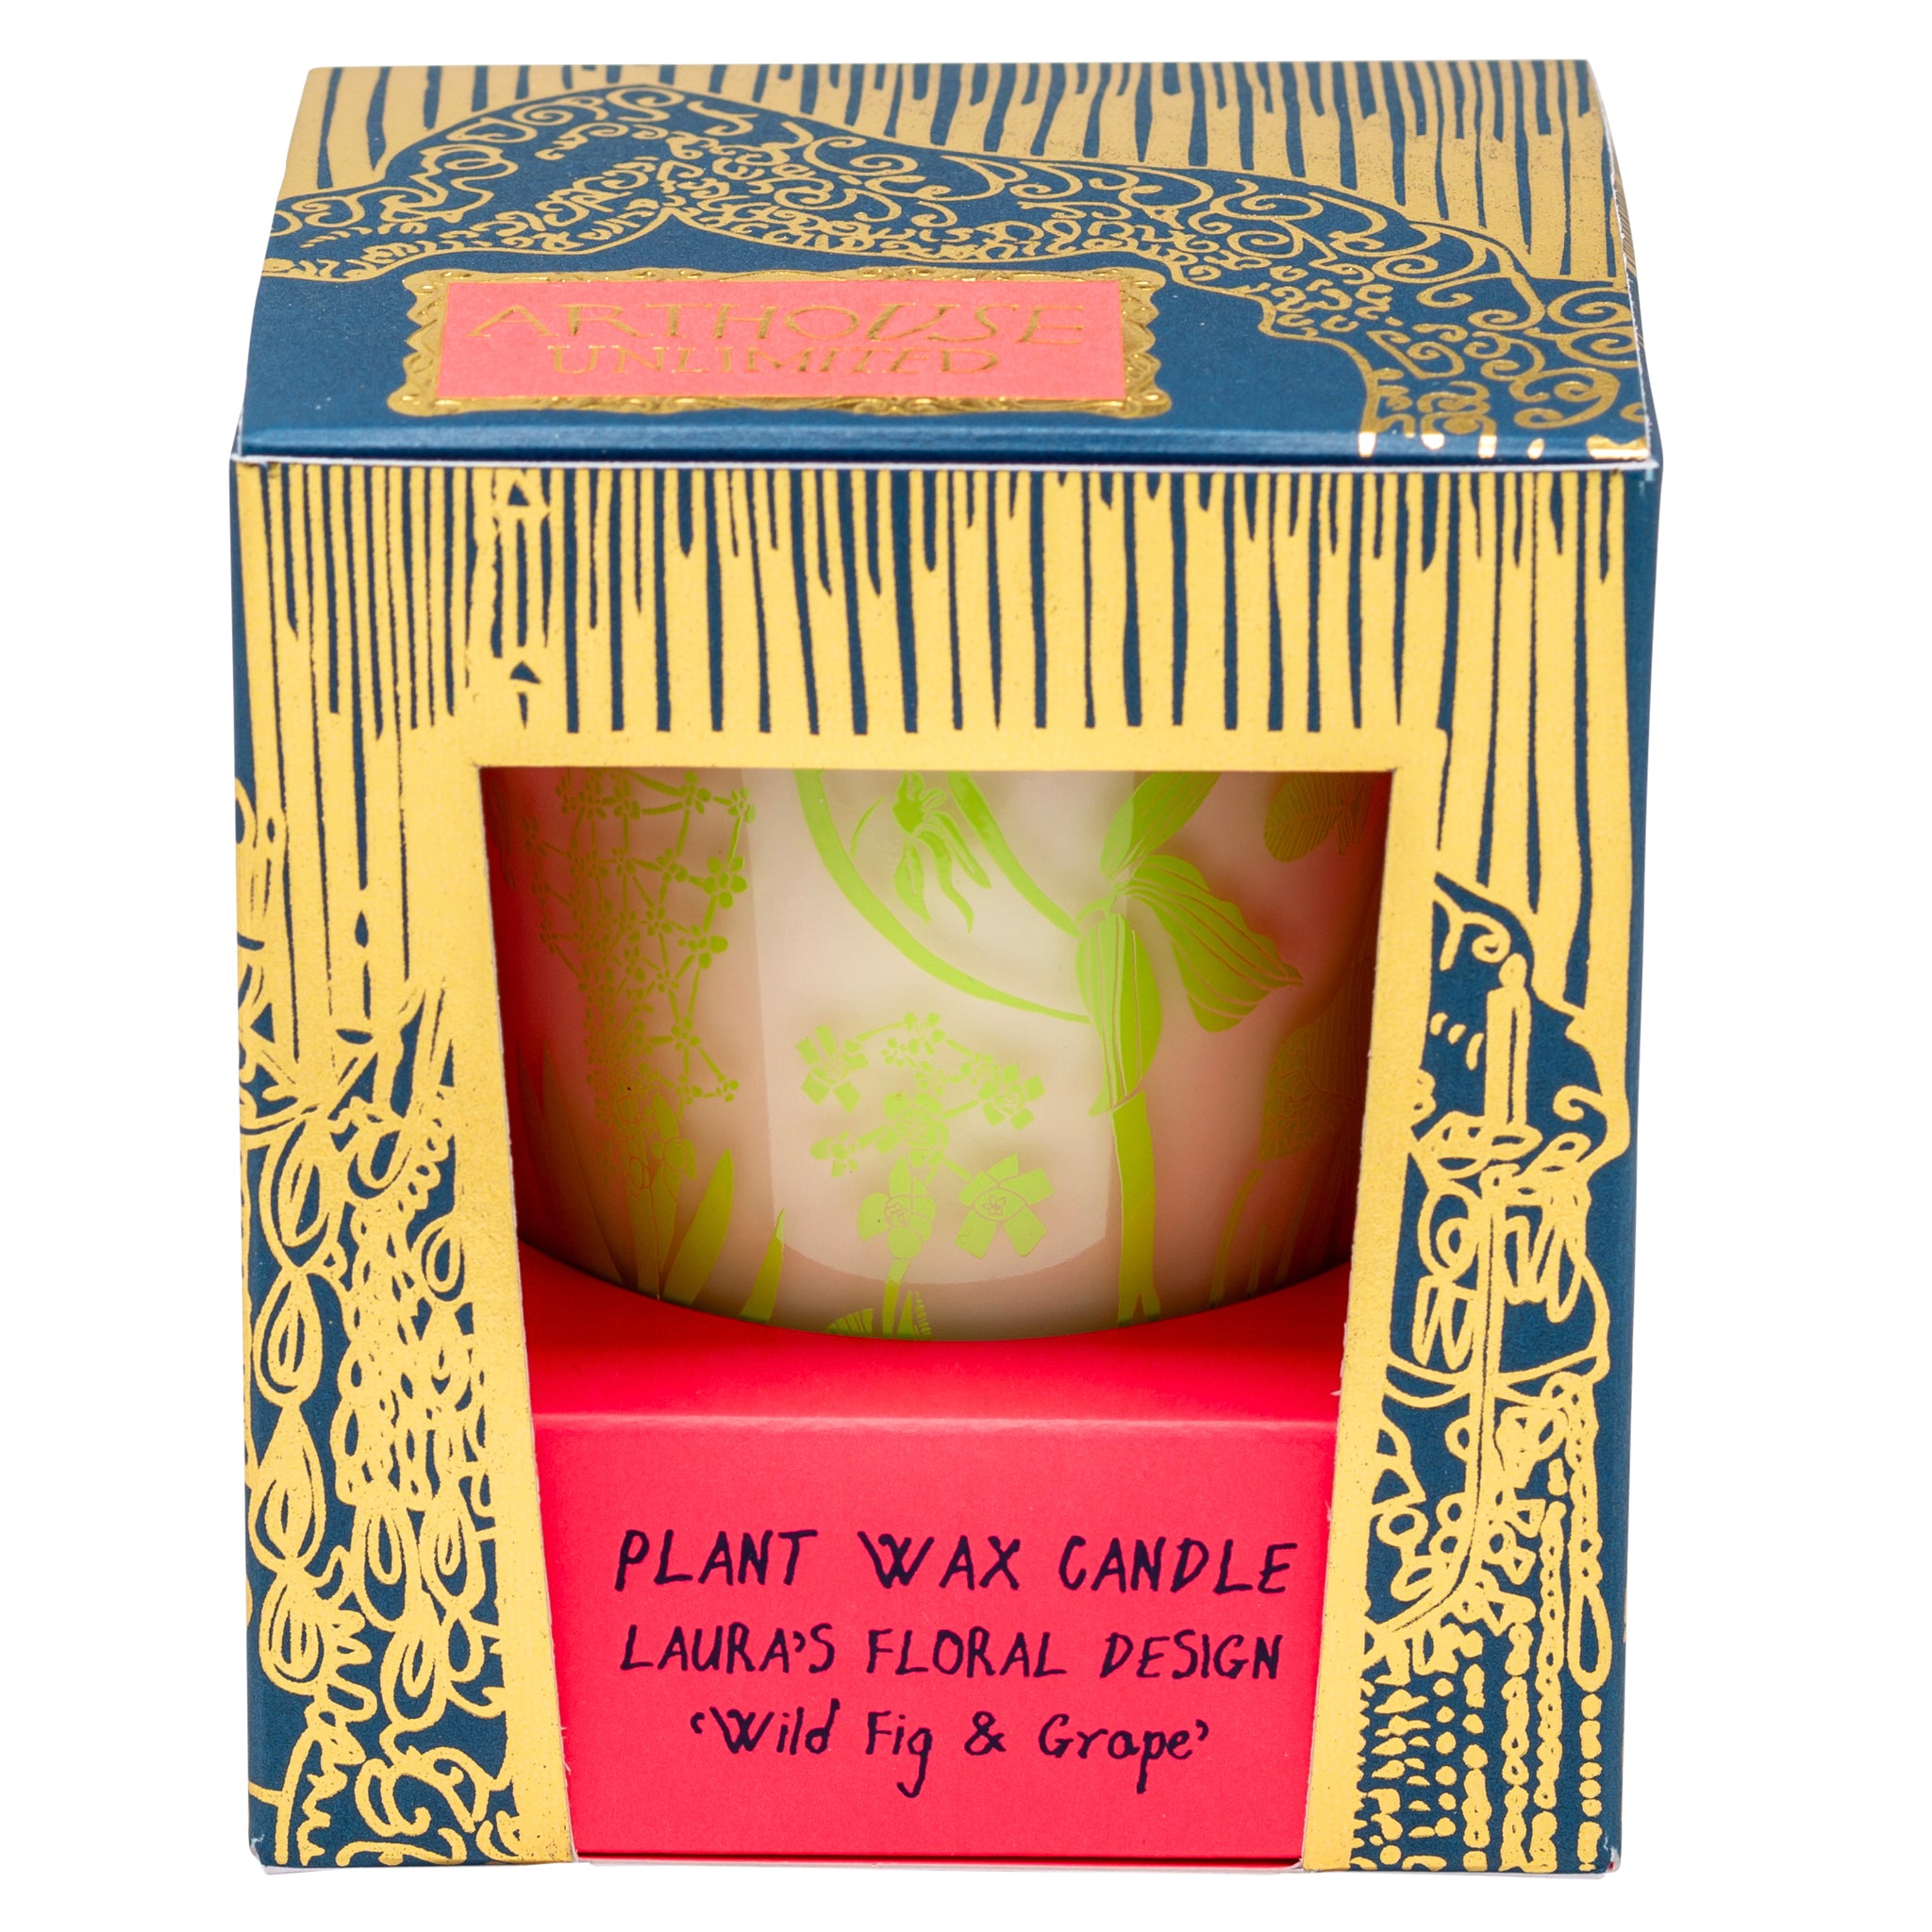 Laura's Floral, Wild Fig & Grape Plant Wax Candle in gold pink and blue box